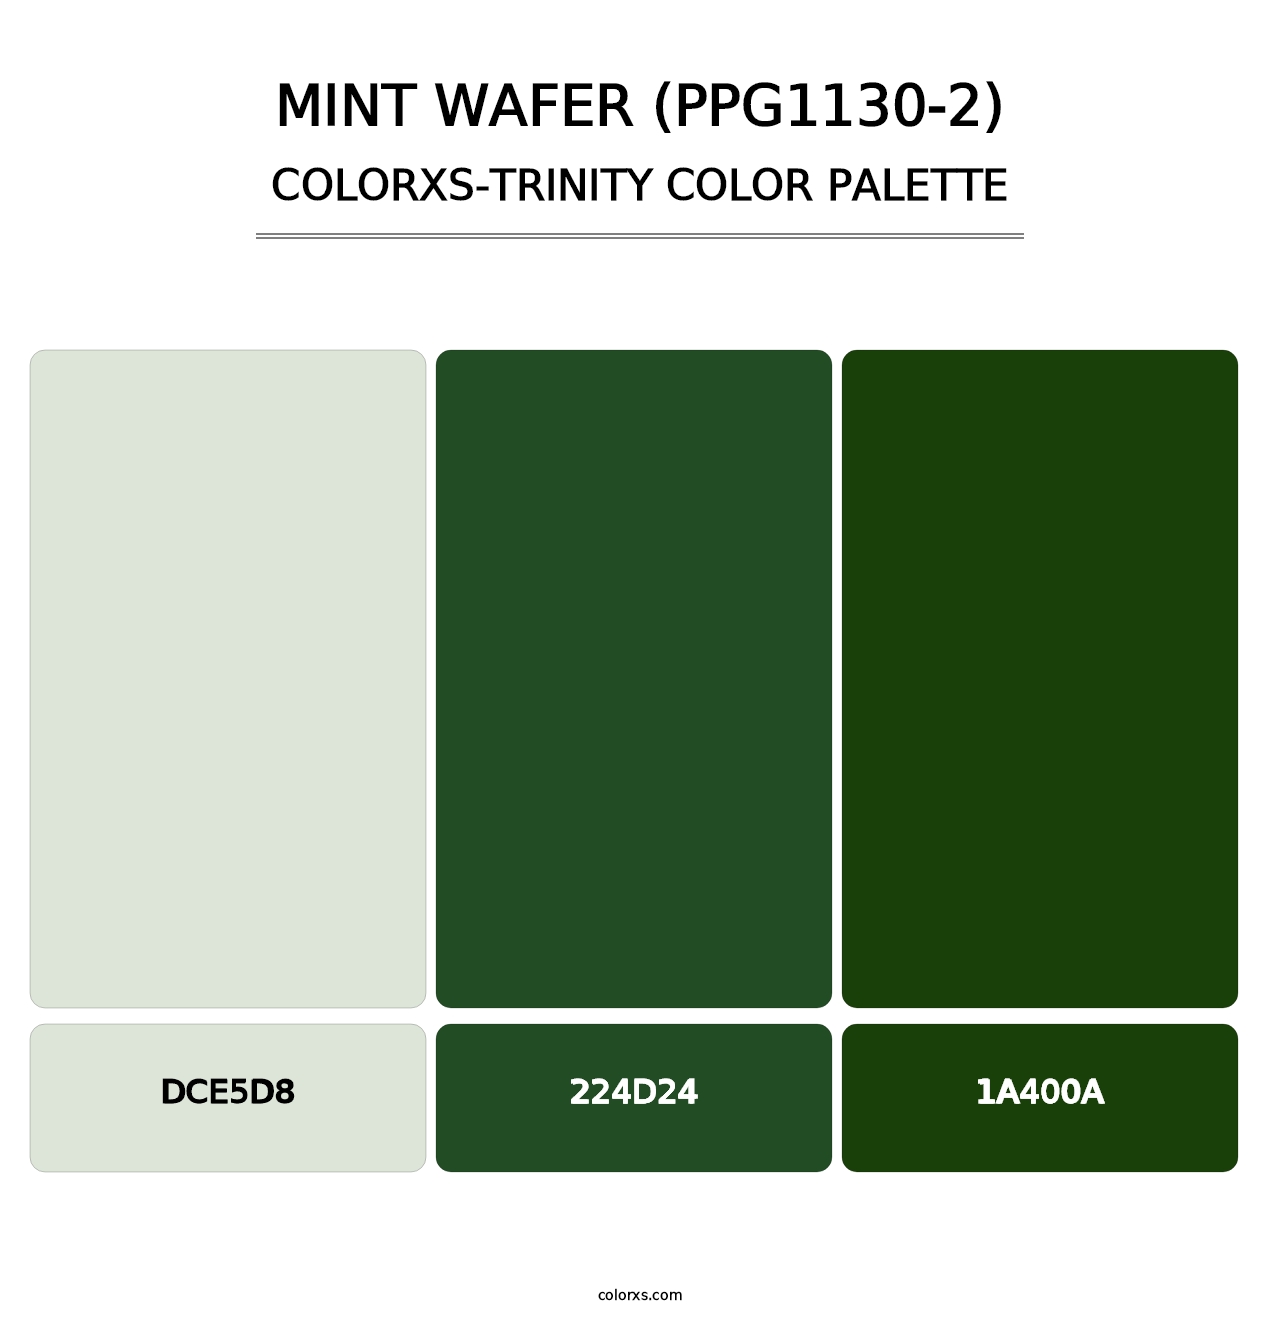 Mint Wafer (PPG1130-2) - Colorxs Trinity Palette